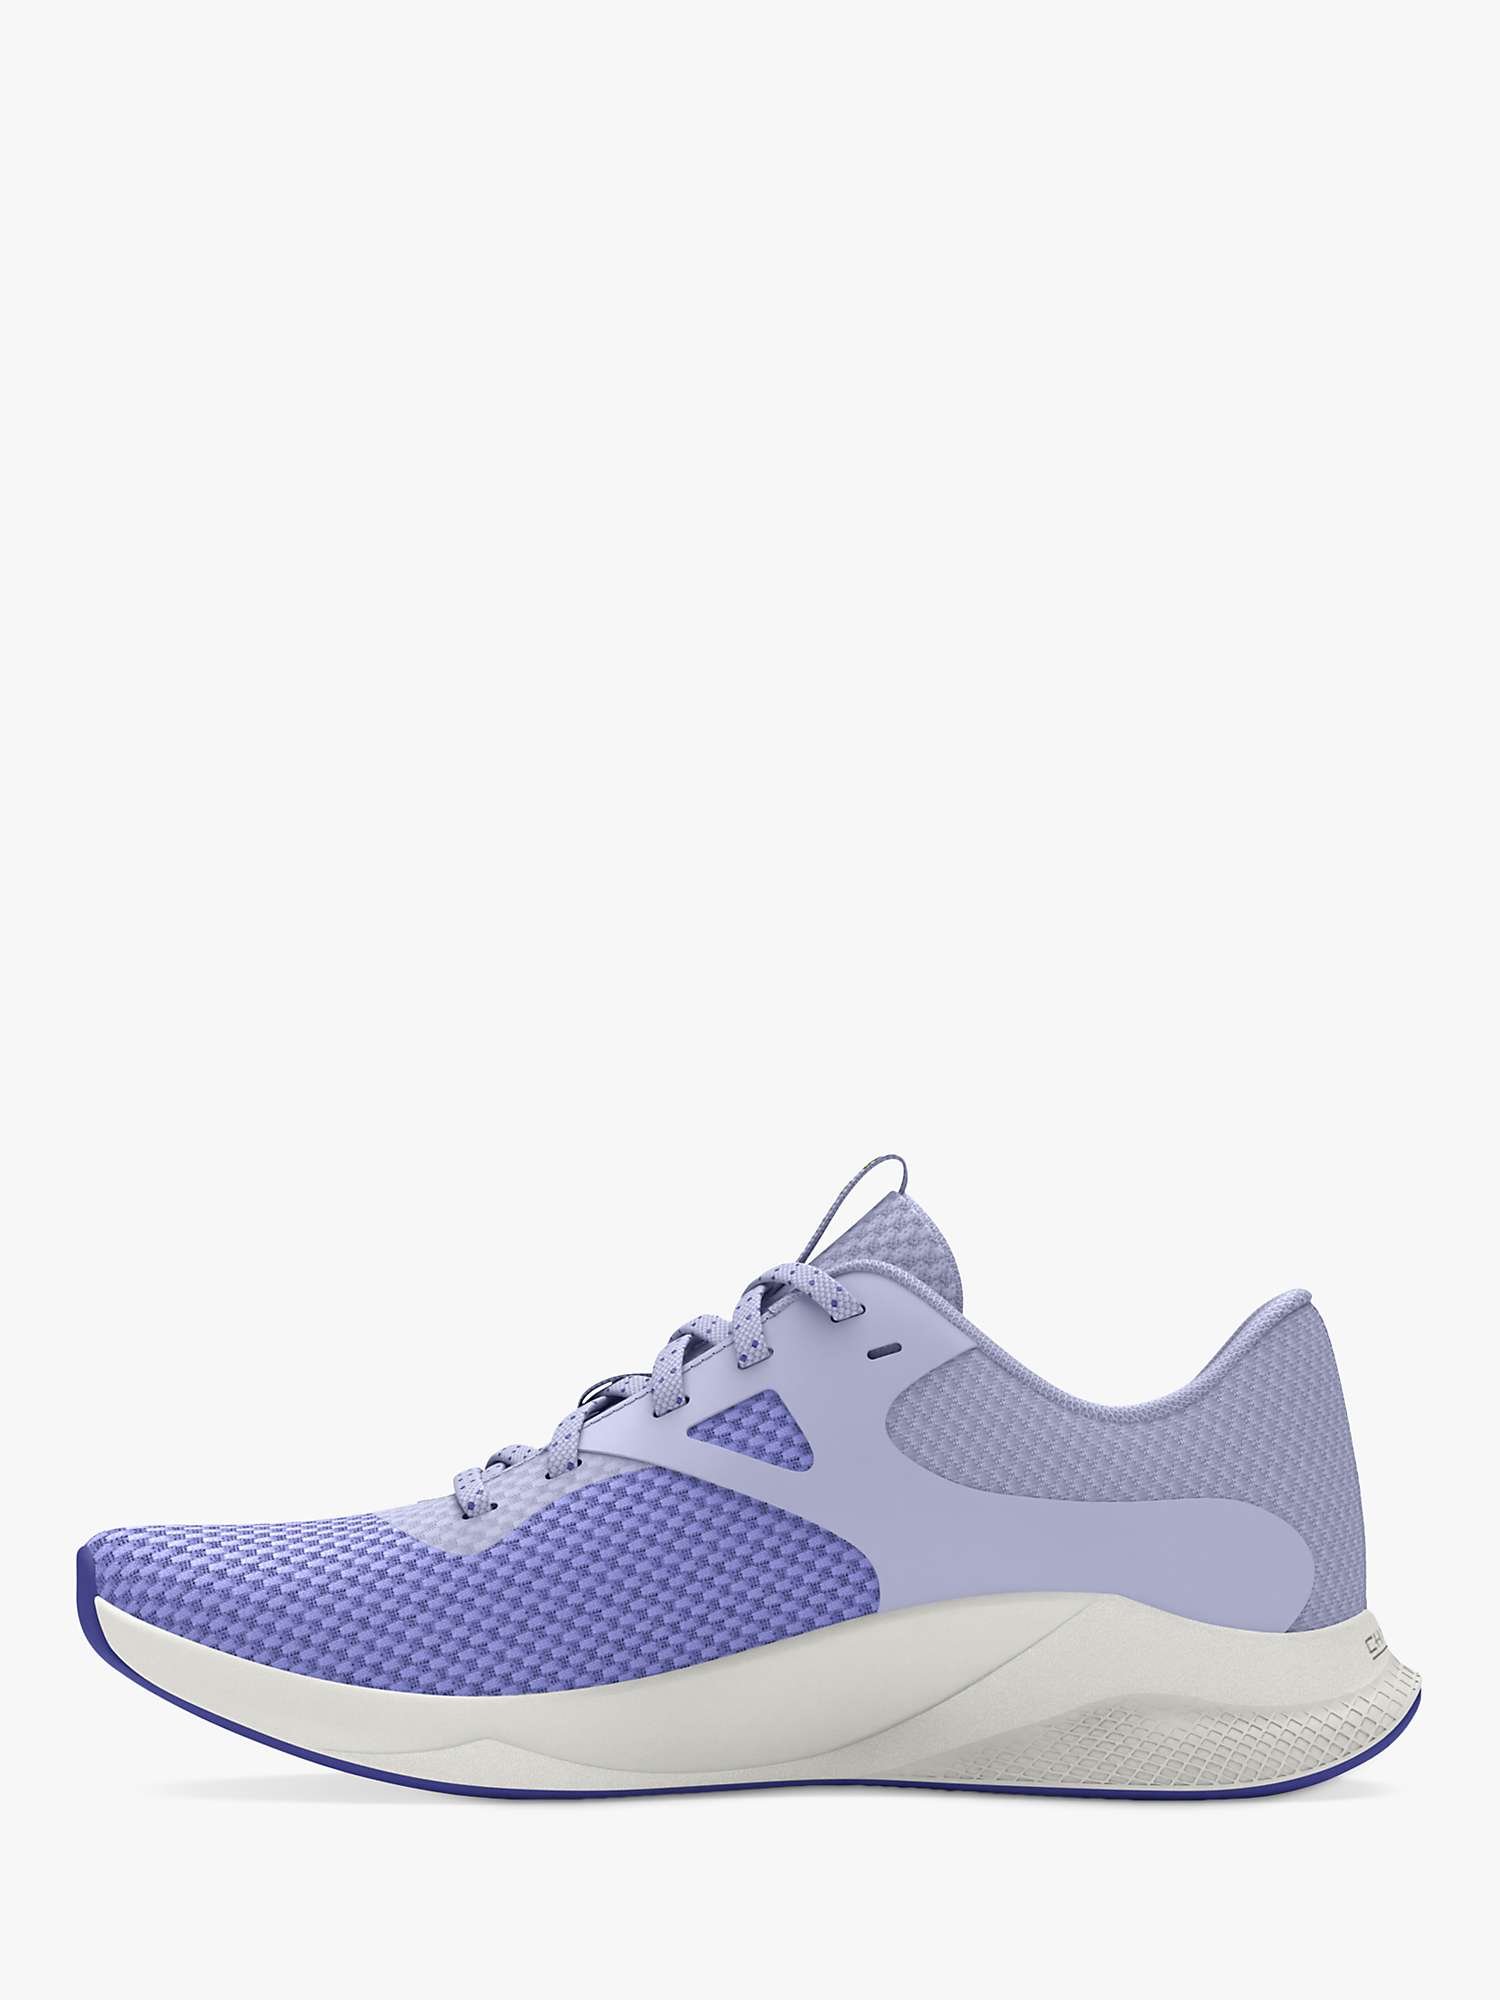 Buy Under Armour Women's Charged Aurora 2 Trainers Online at johnlewis.com